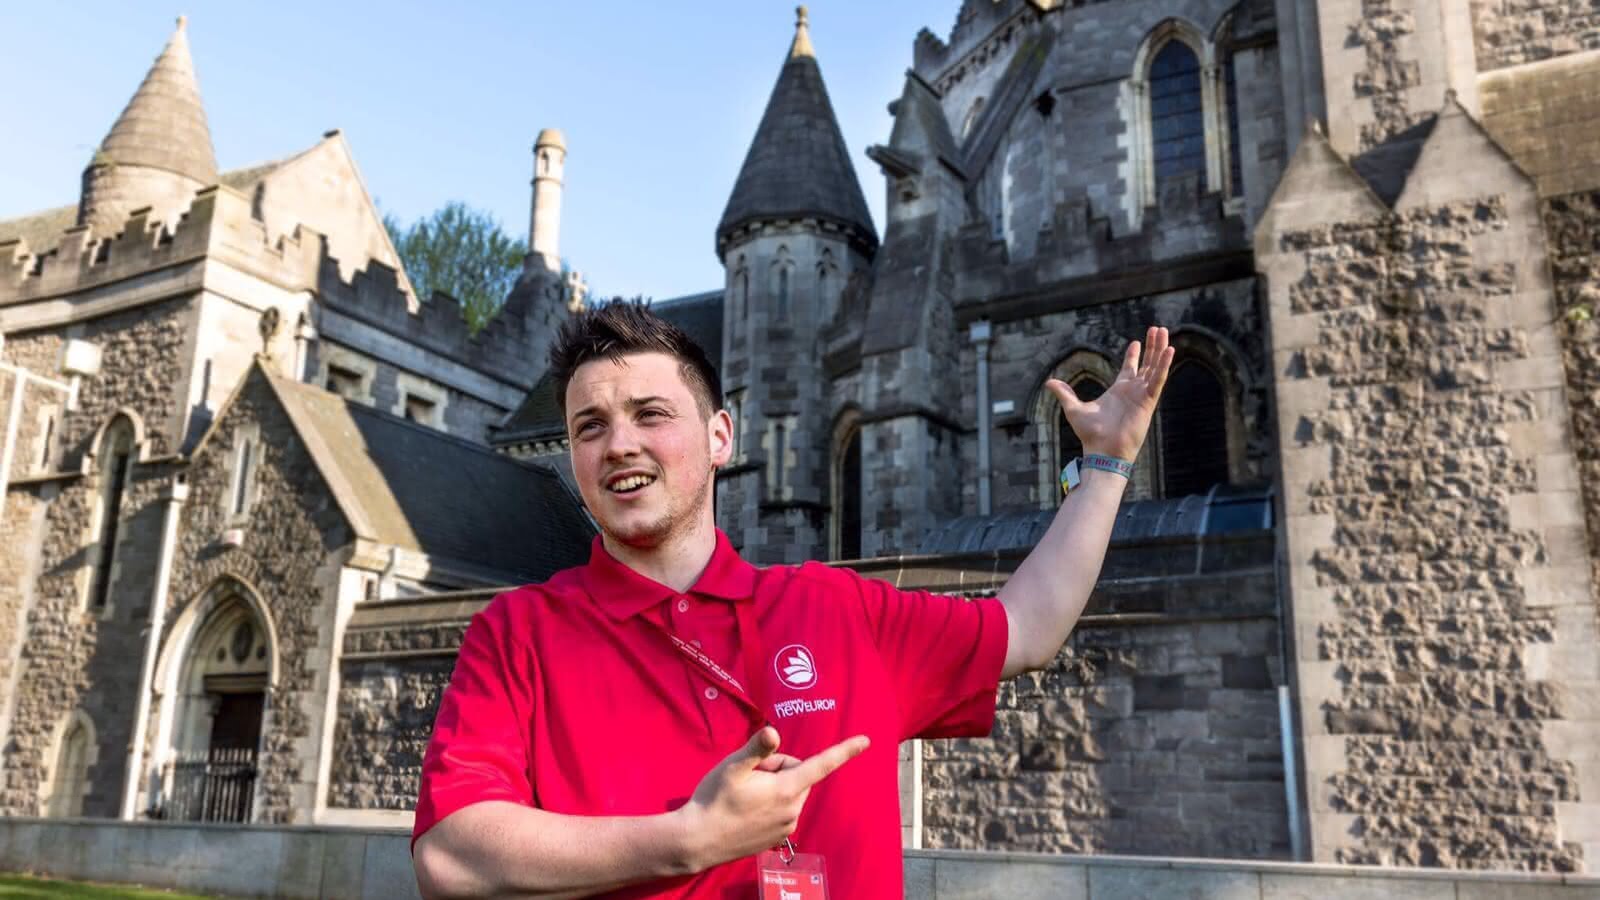 Dublin Free Tour guide in front of Christ Church Cathedral